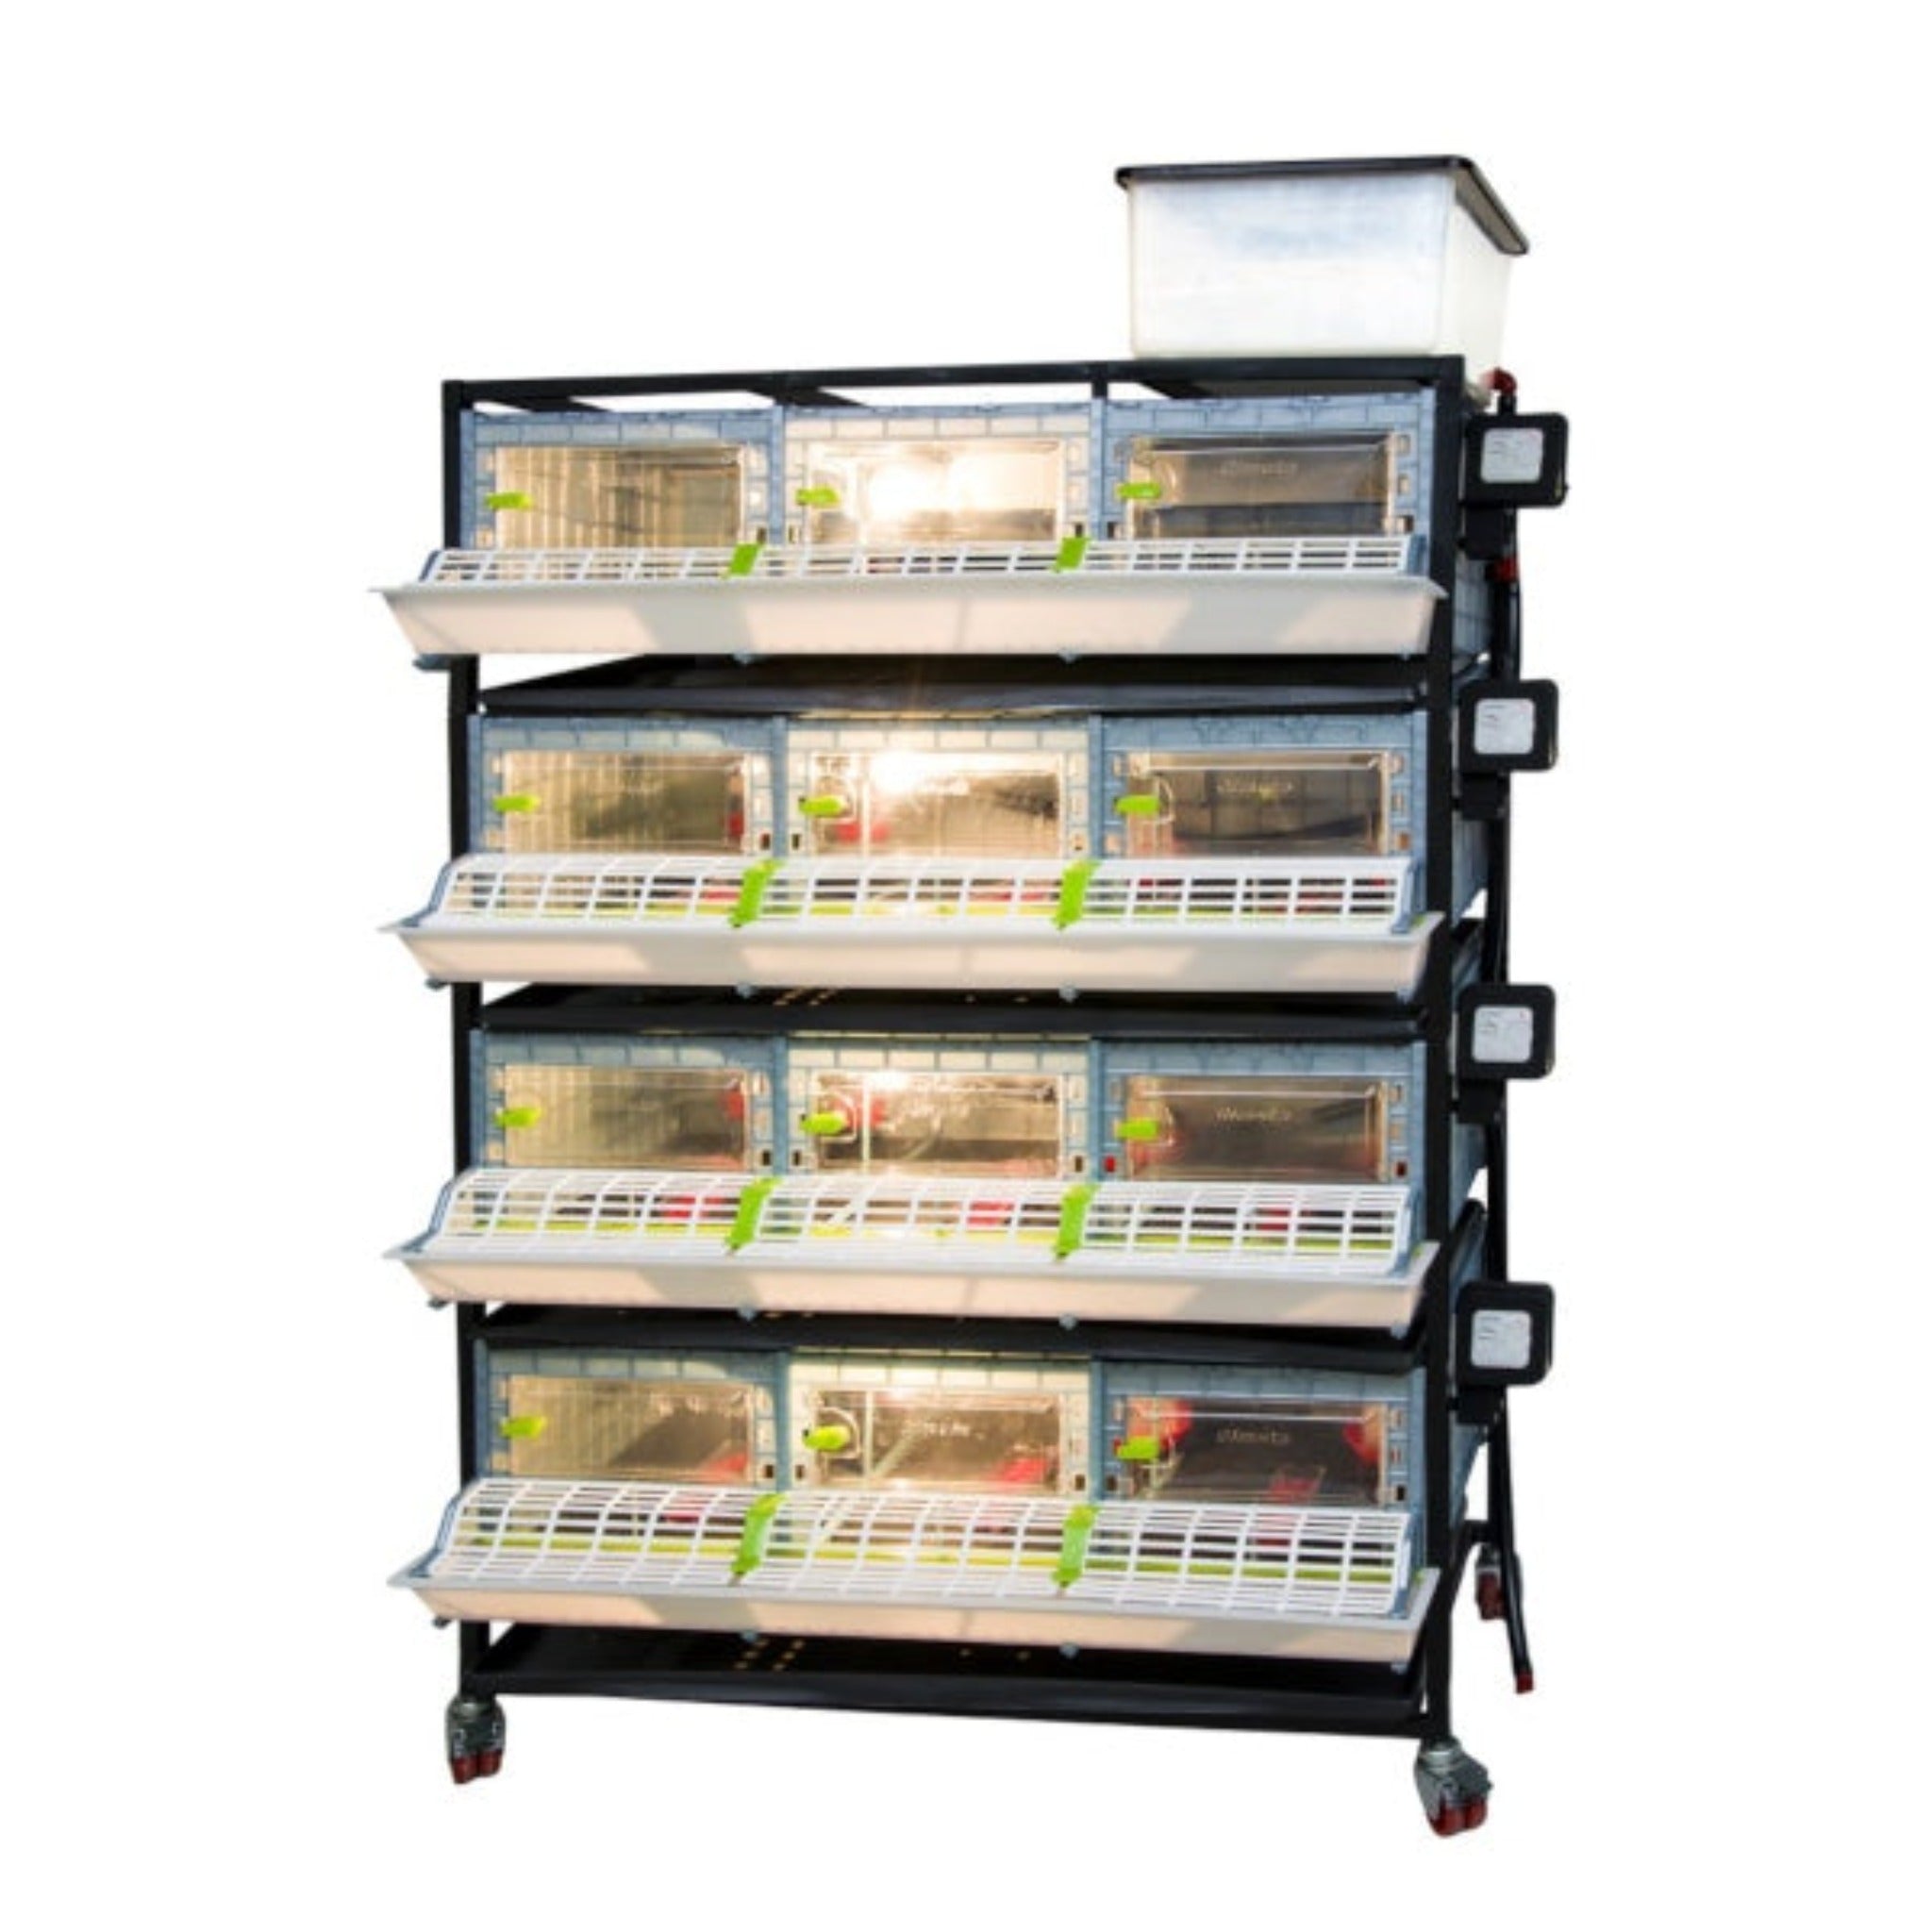 Hatching Time Cimuka 4 Layer 9.5 Inch Brooder front visible with lights on. Feeding trough is located on front of brooders. Clear plastic doors with locks can be seen. Heater thermostat visible on side of brooders. Brooders are on Metal frame with rolling casters for mobility.